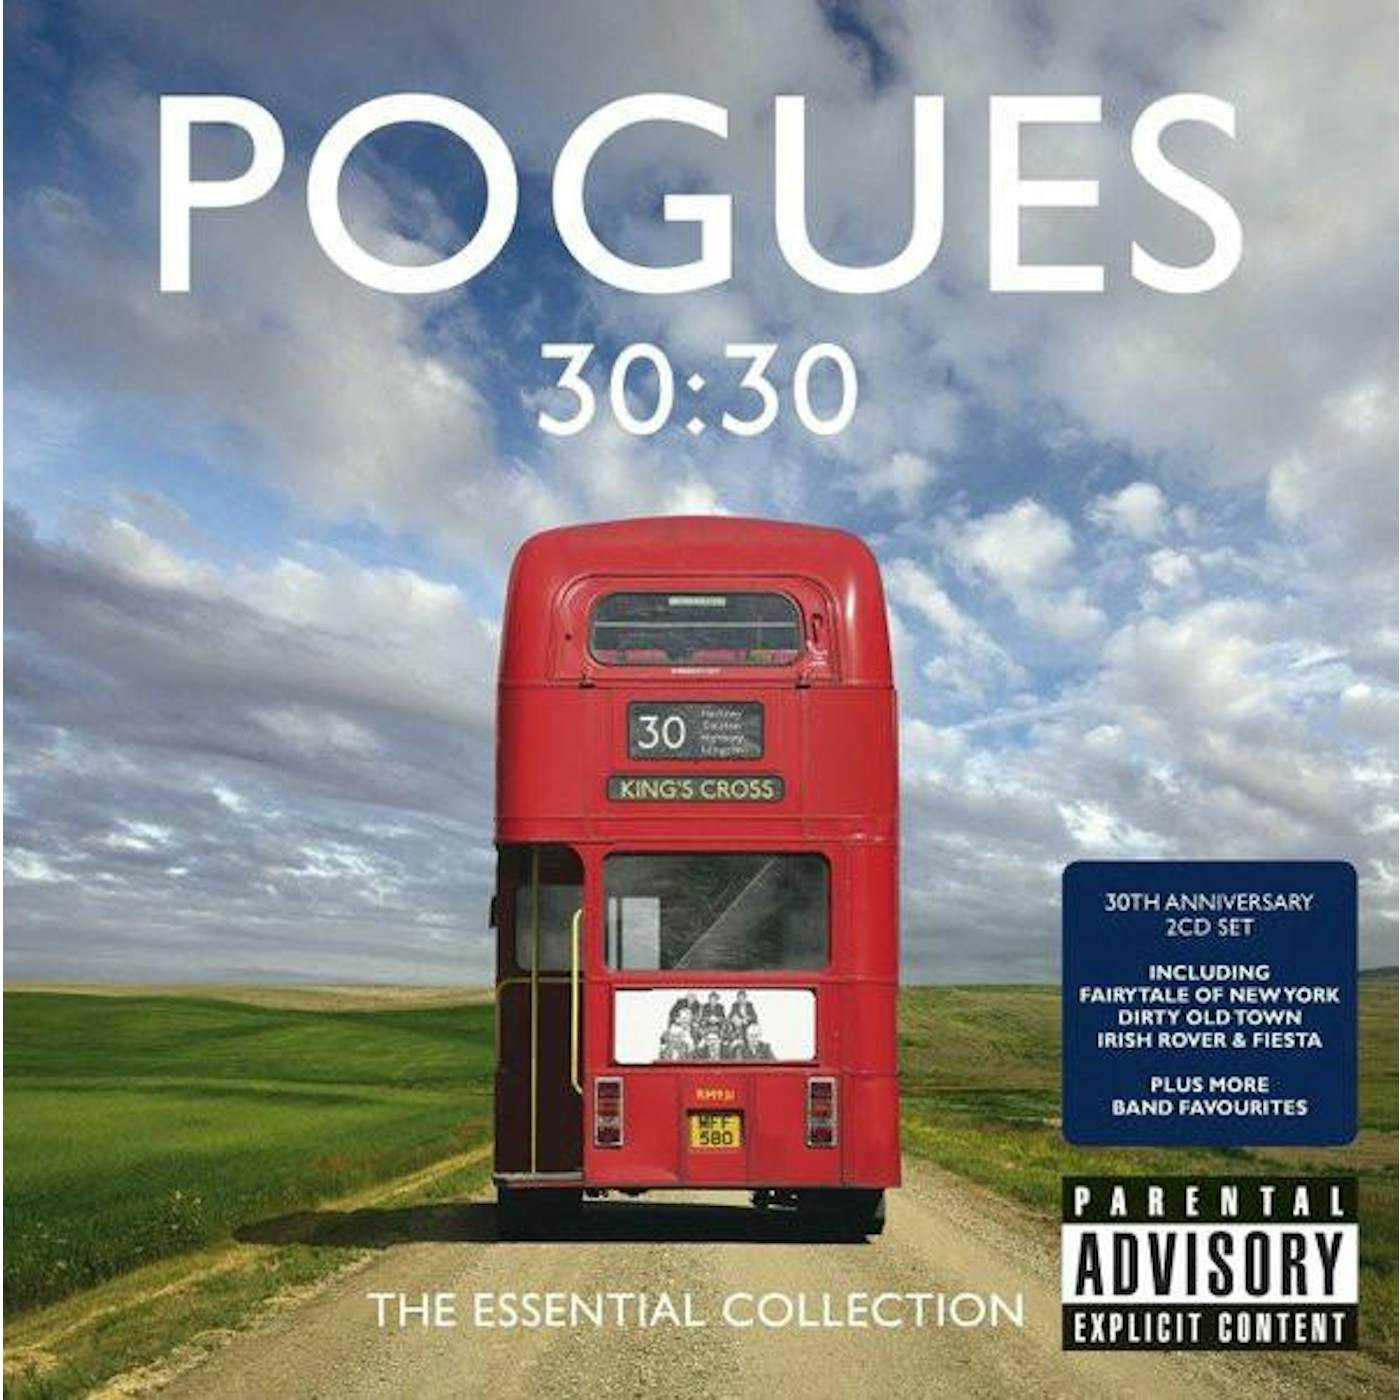 The Pogues 30:30: THE ESSENTIAL COLLECTION CD